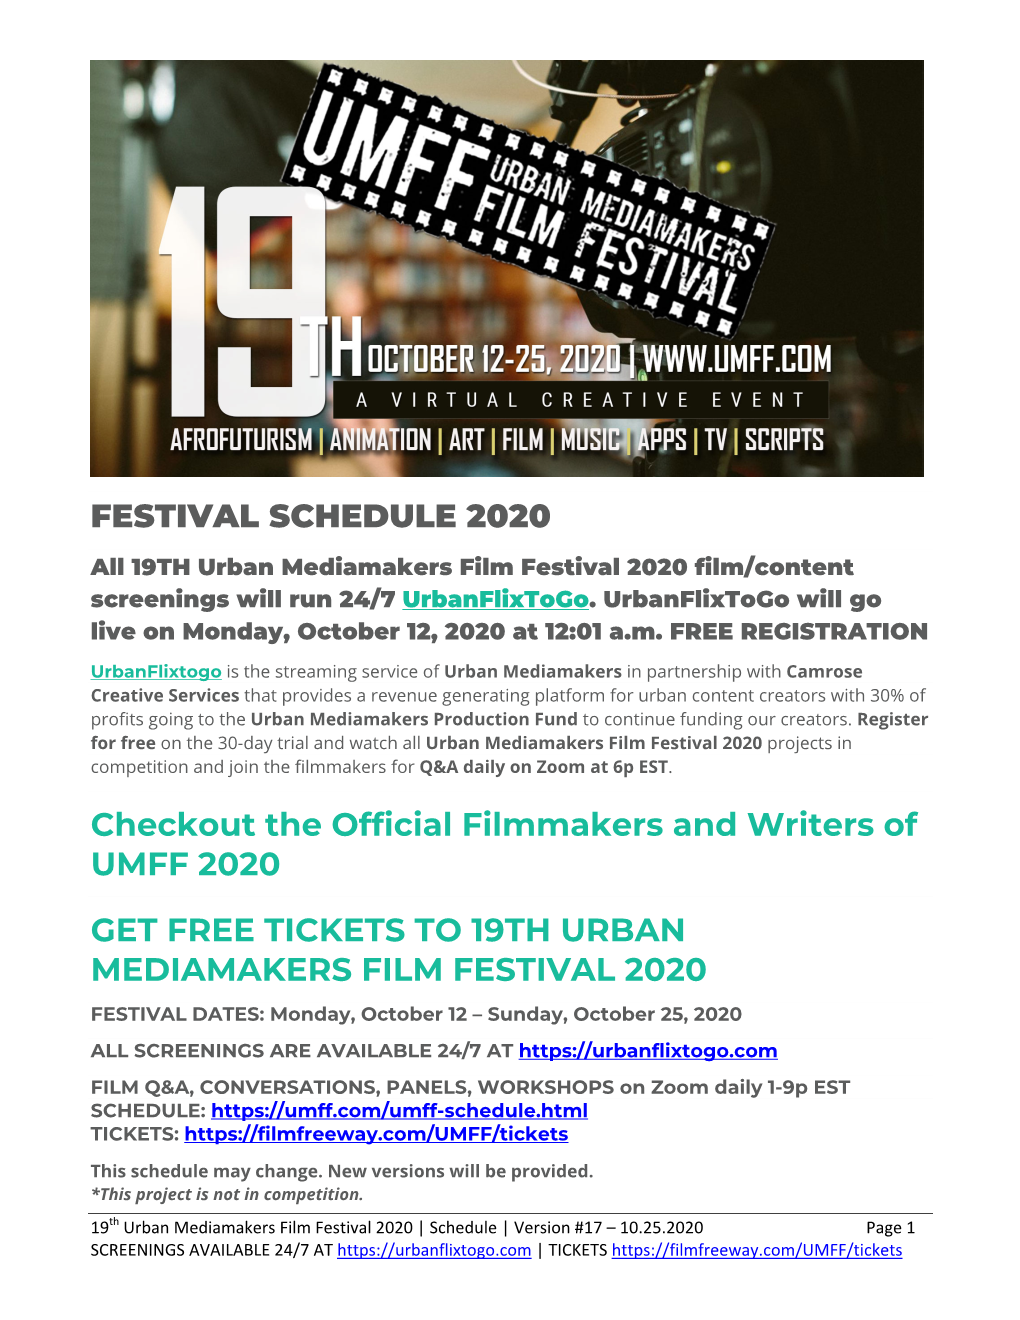 FESTIVAL SCHEDULE 2020 Checkout the Official Filmmakers and Writers of UMFF 2020 GET FREE TICKETS to 19TH URBAN MEDIAMAKERS FILM